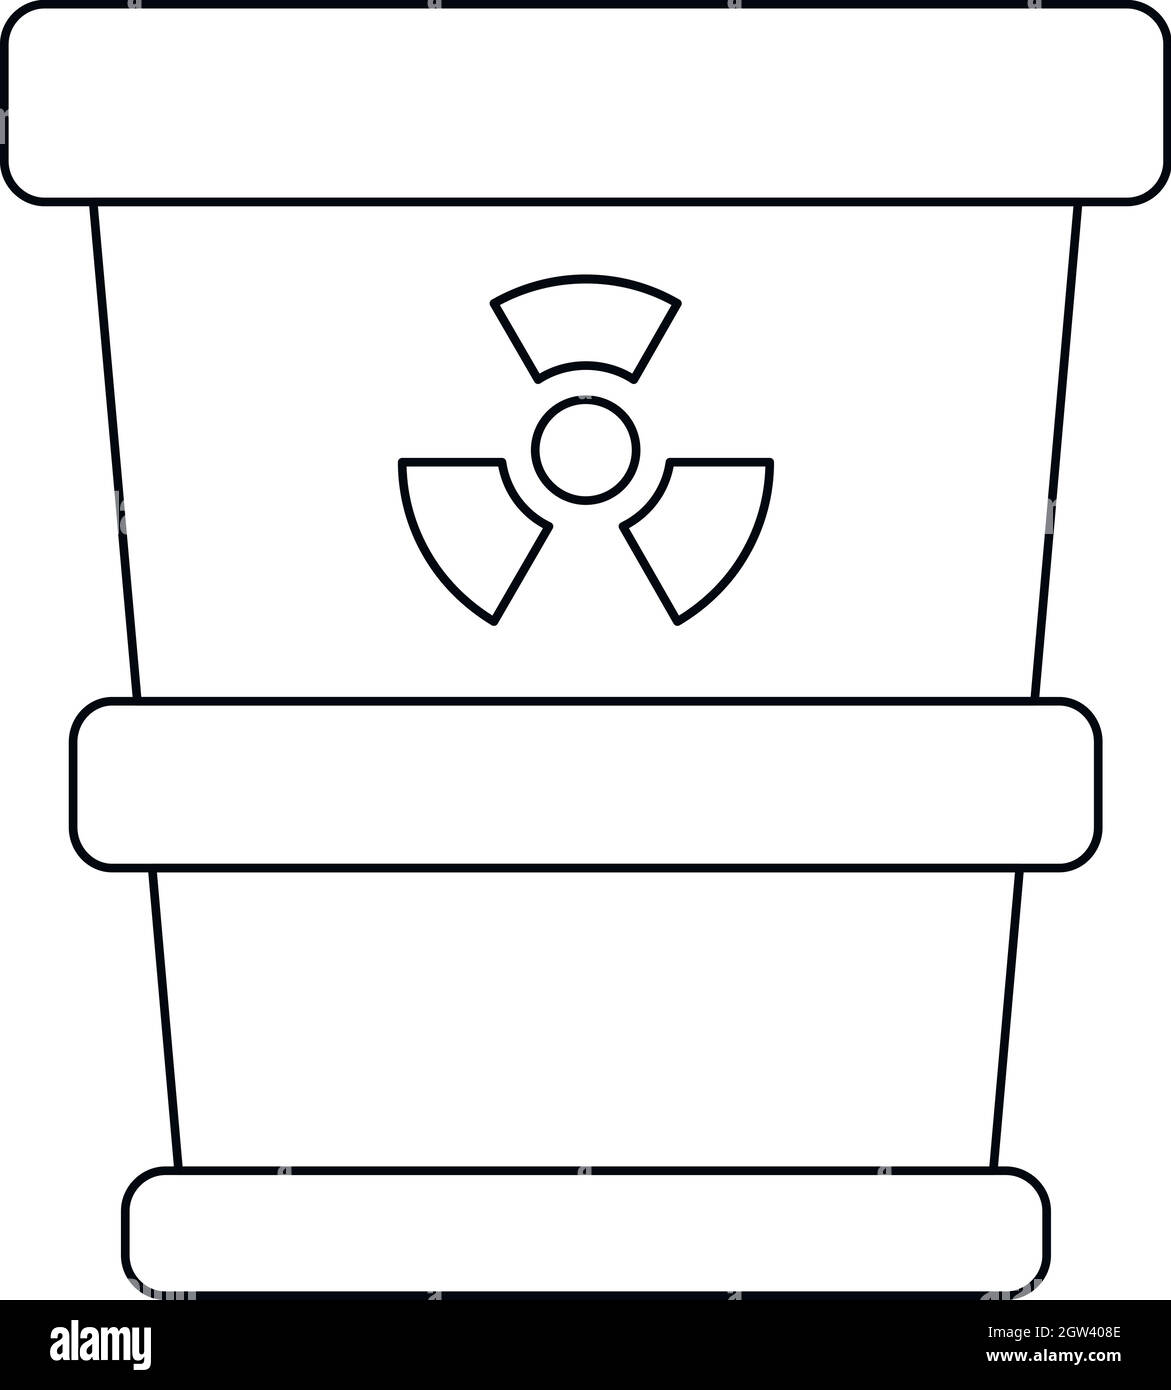 Trash can with radioactive waste icon Stock Vector